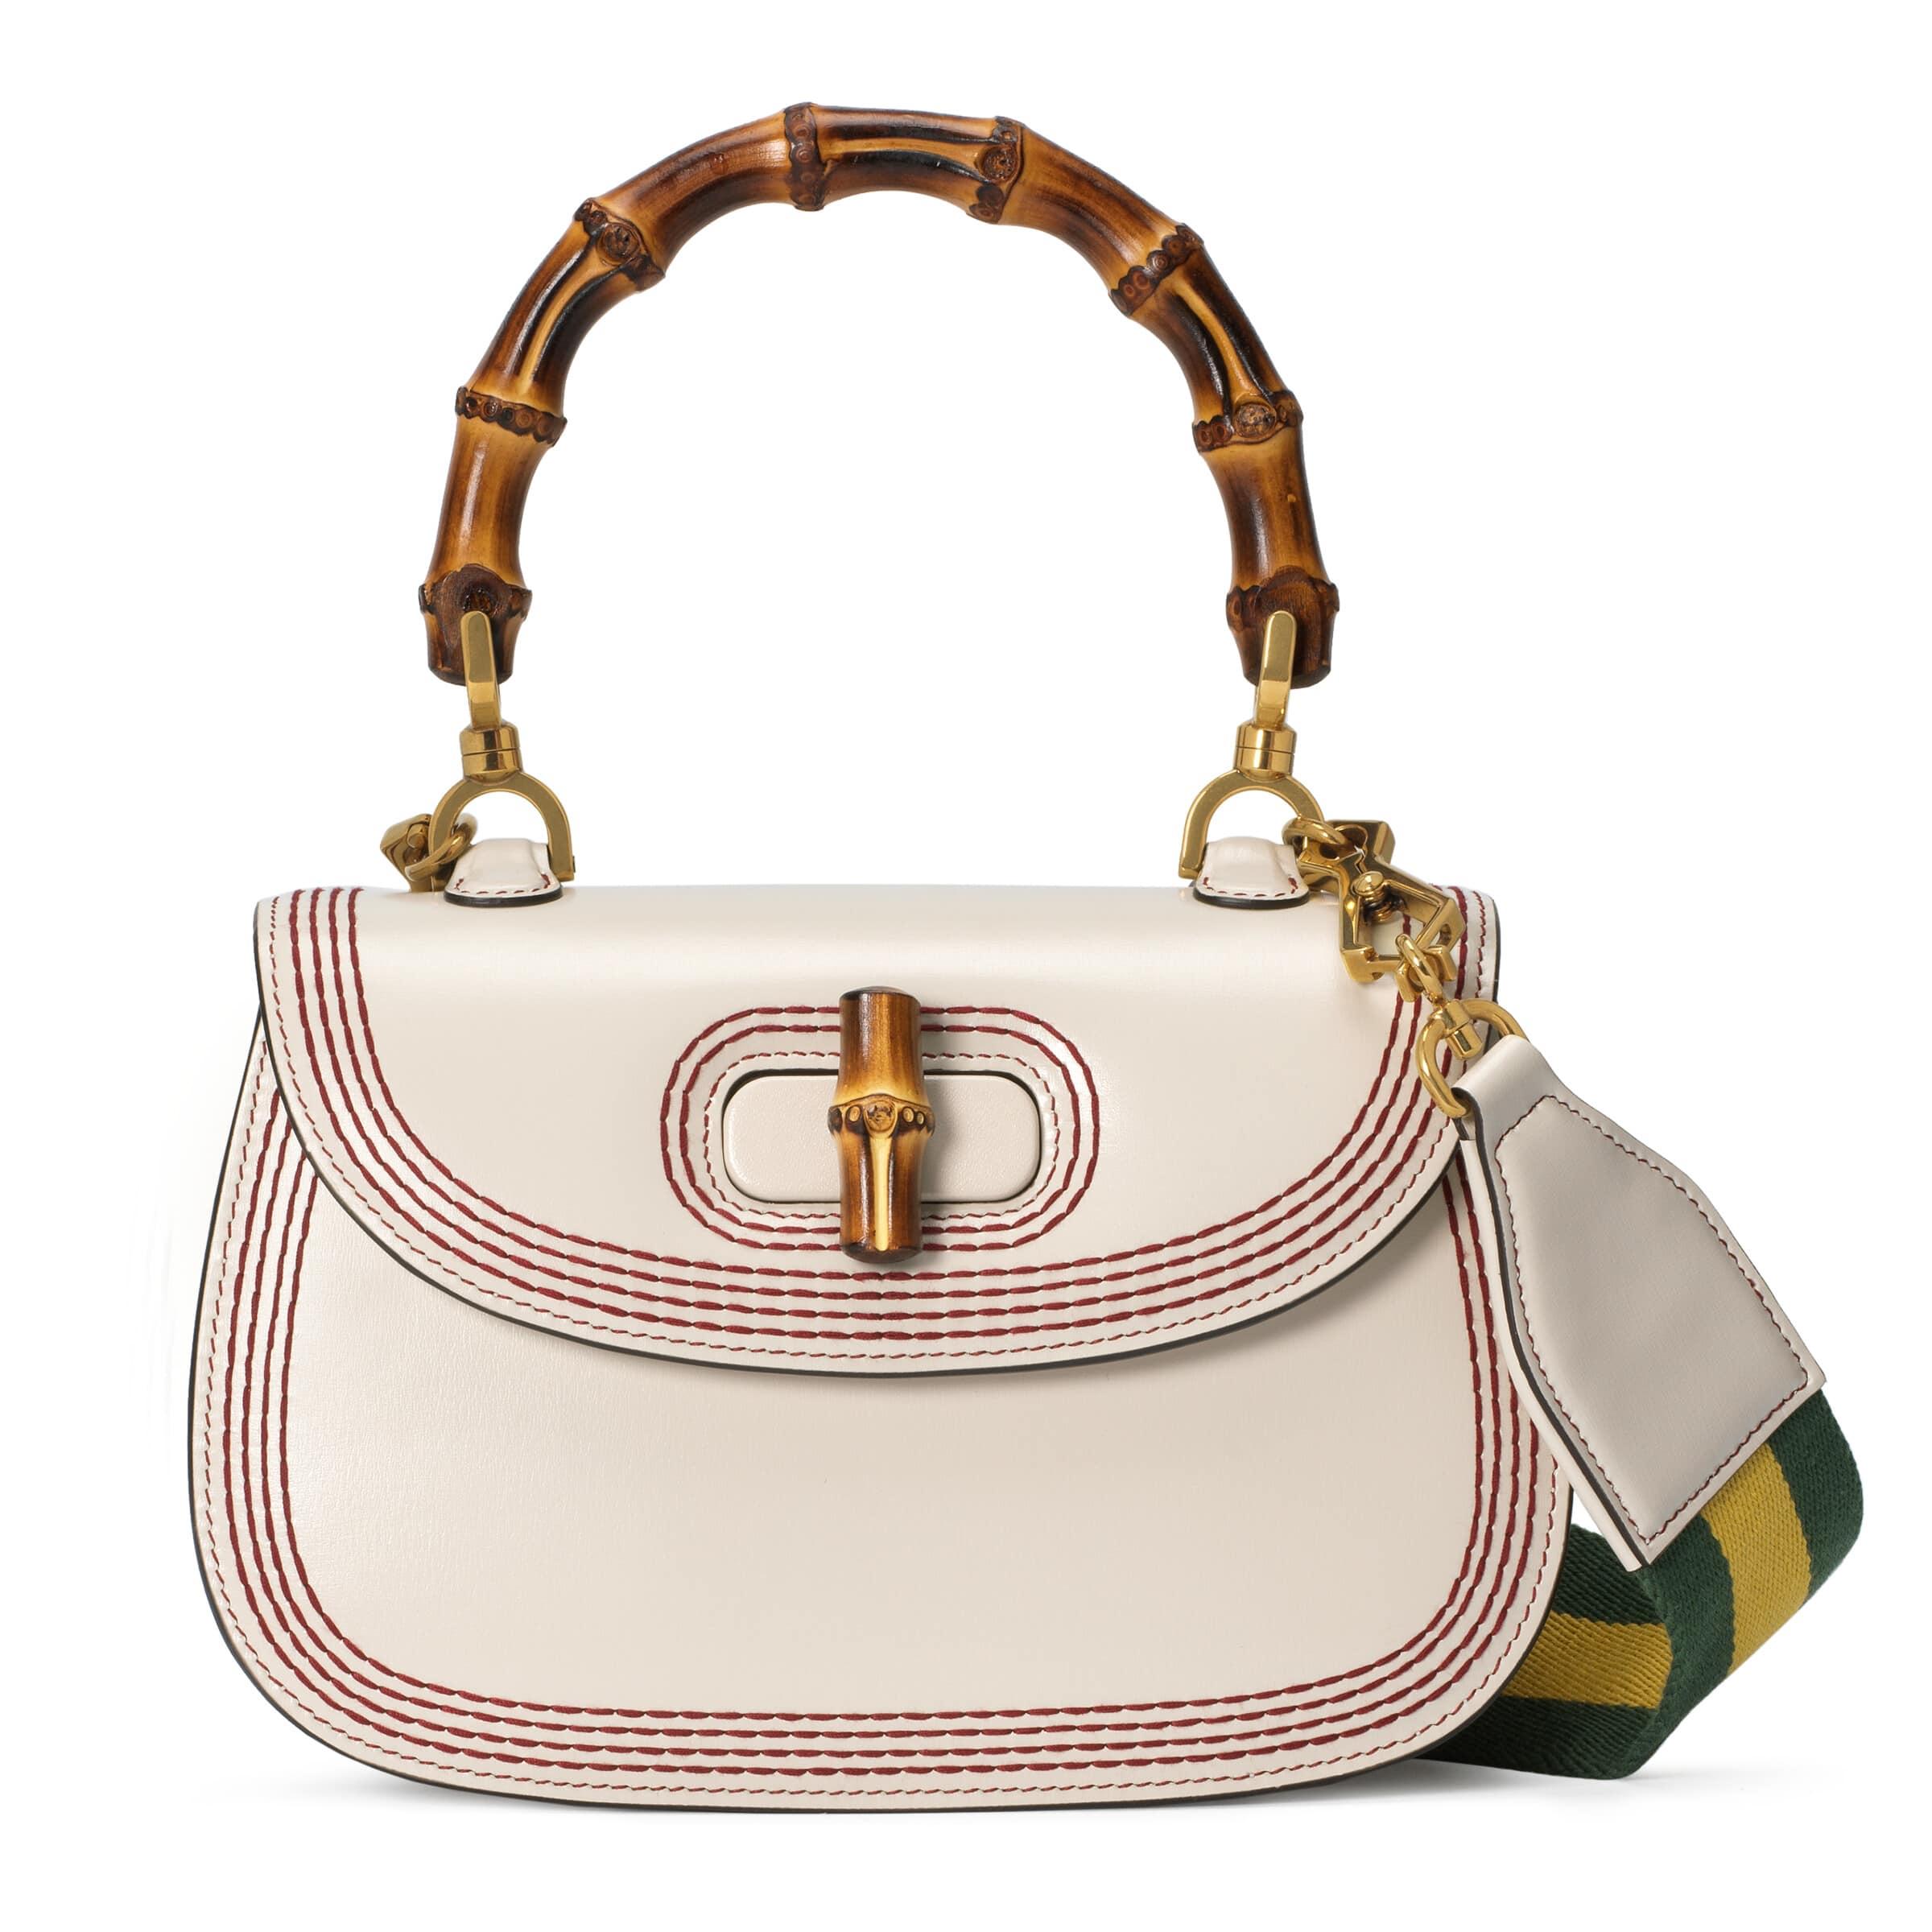 Gucci Bamboo 1947 mini top handle bag in white leather